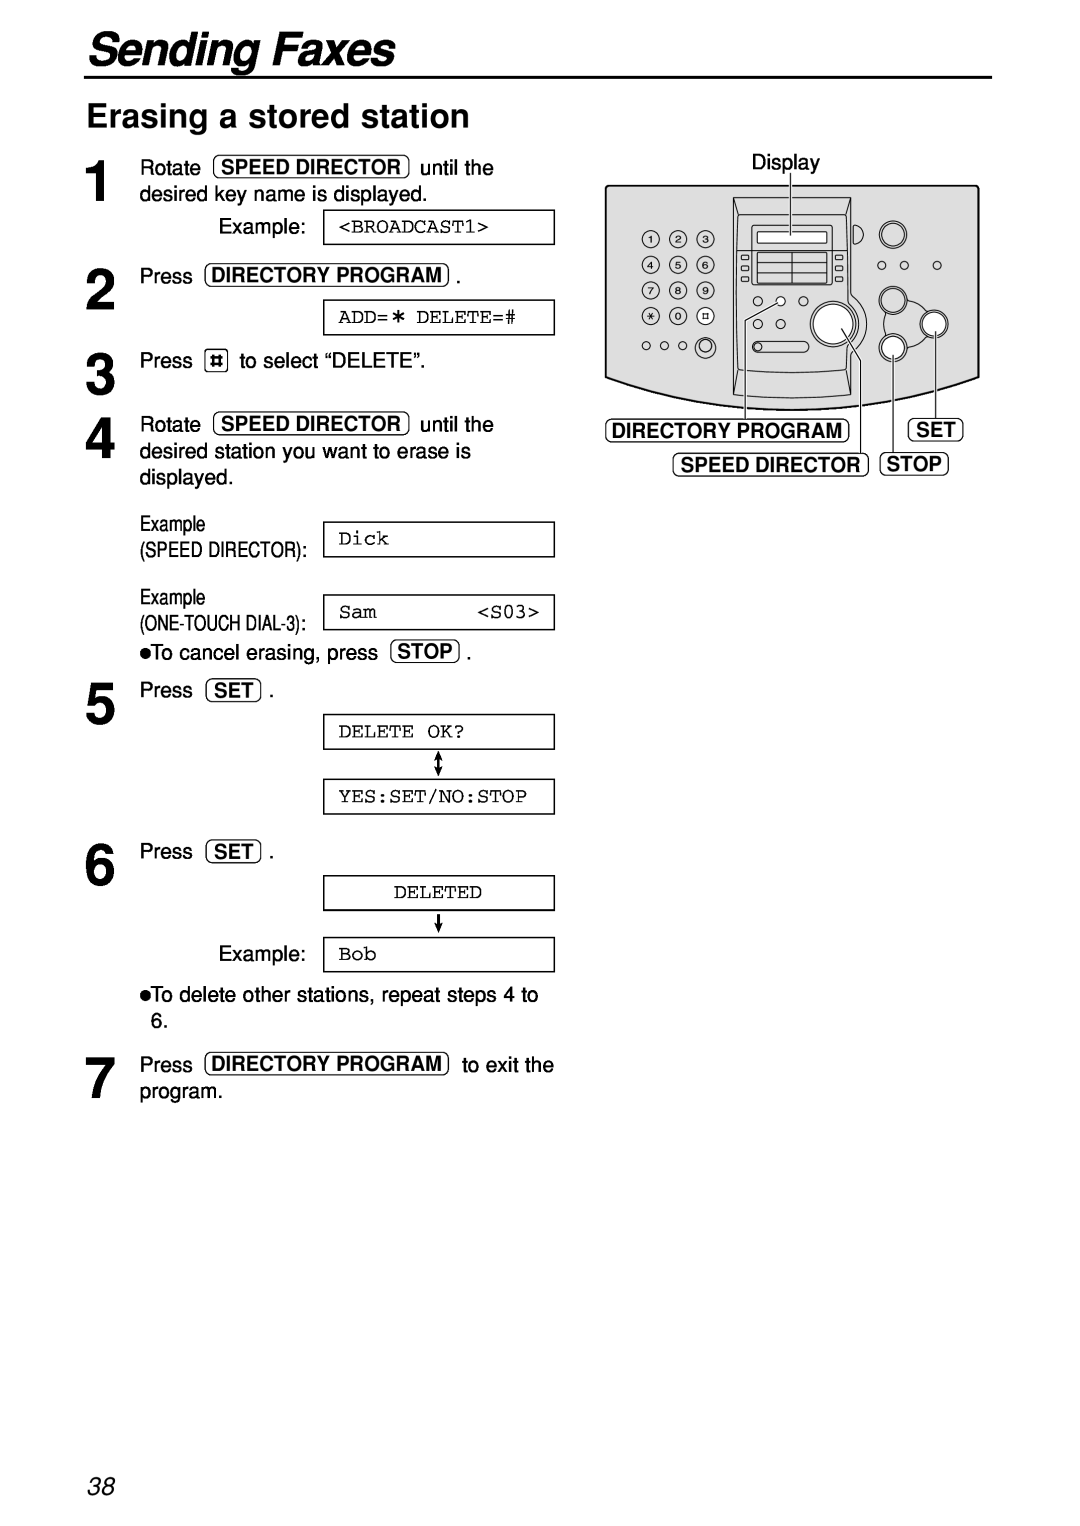 Panasonic KX-FL501C manual Erasing a stored station, Sending Faxes, Example ONE-TOUCH DIAL-3 